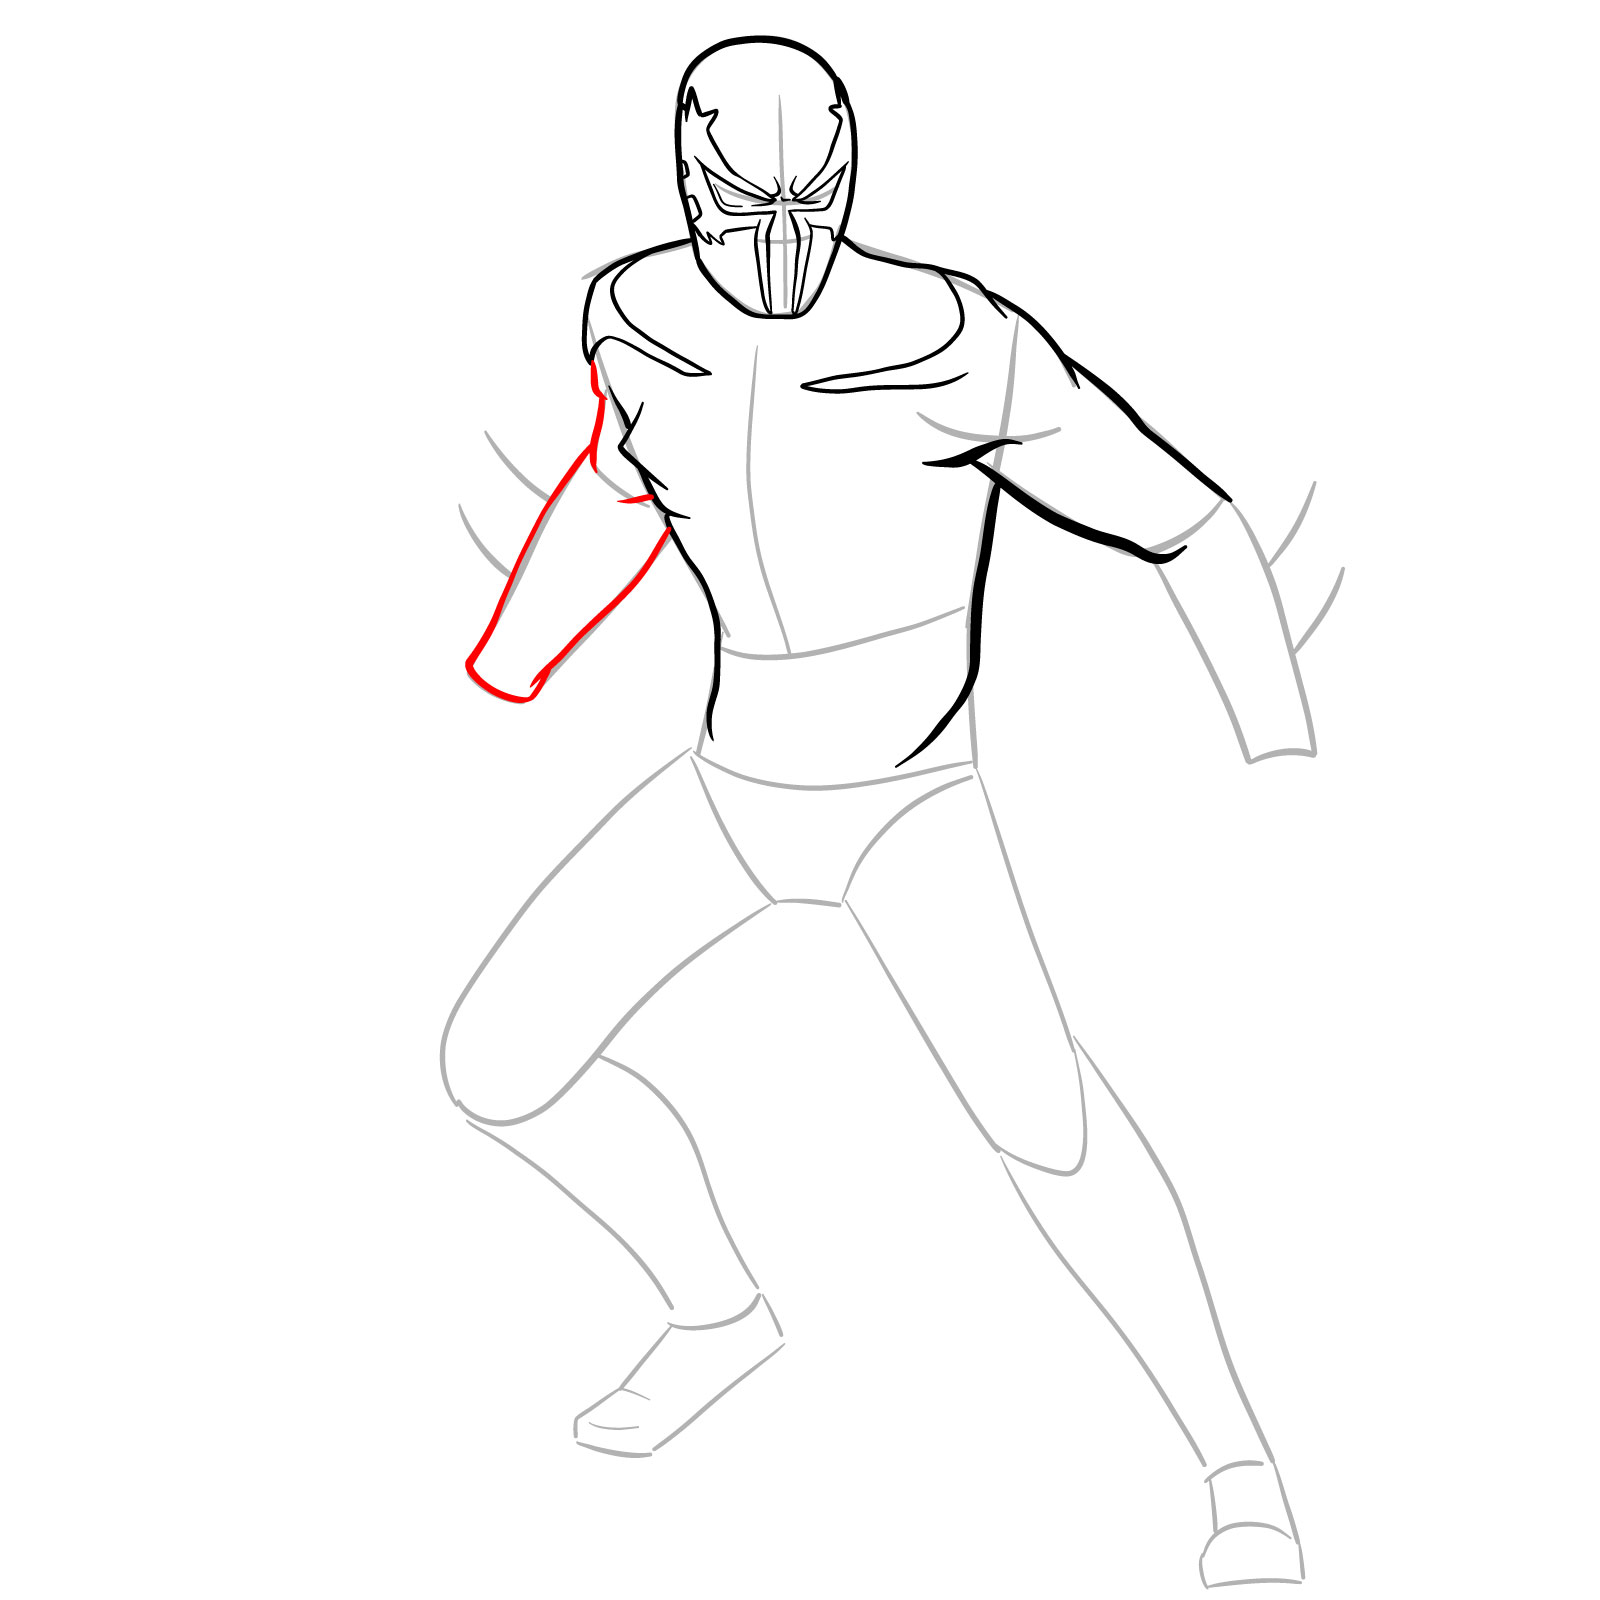 How to draw Spider-Man 2099 - step 15